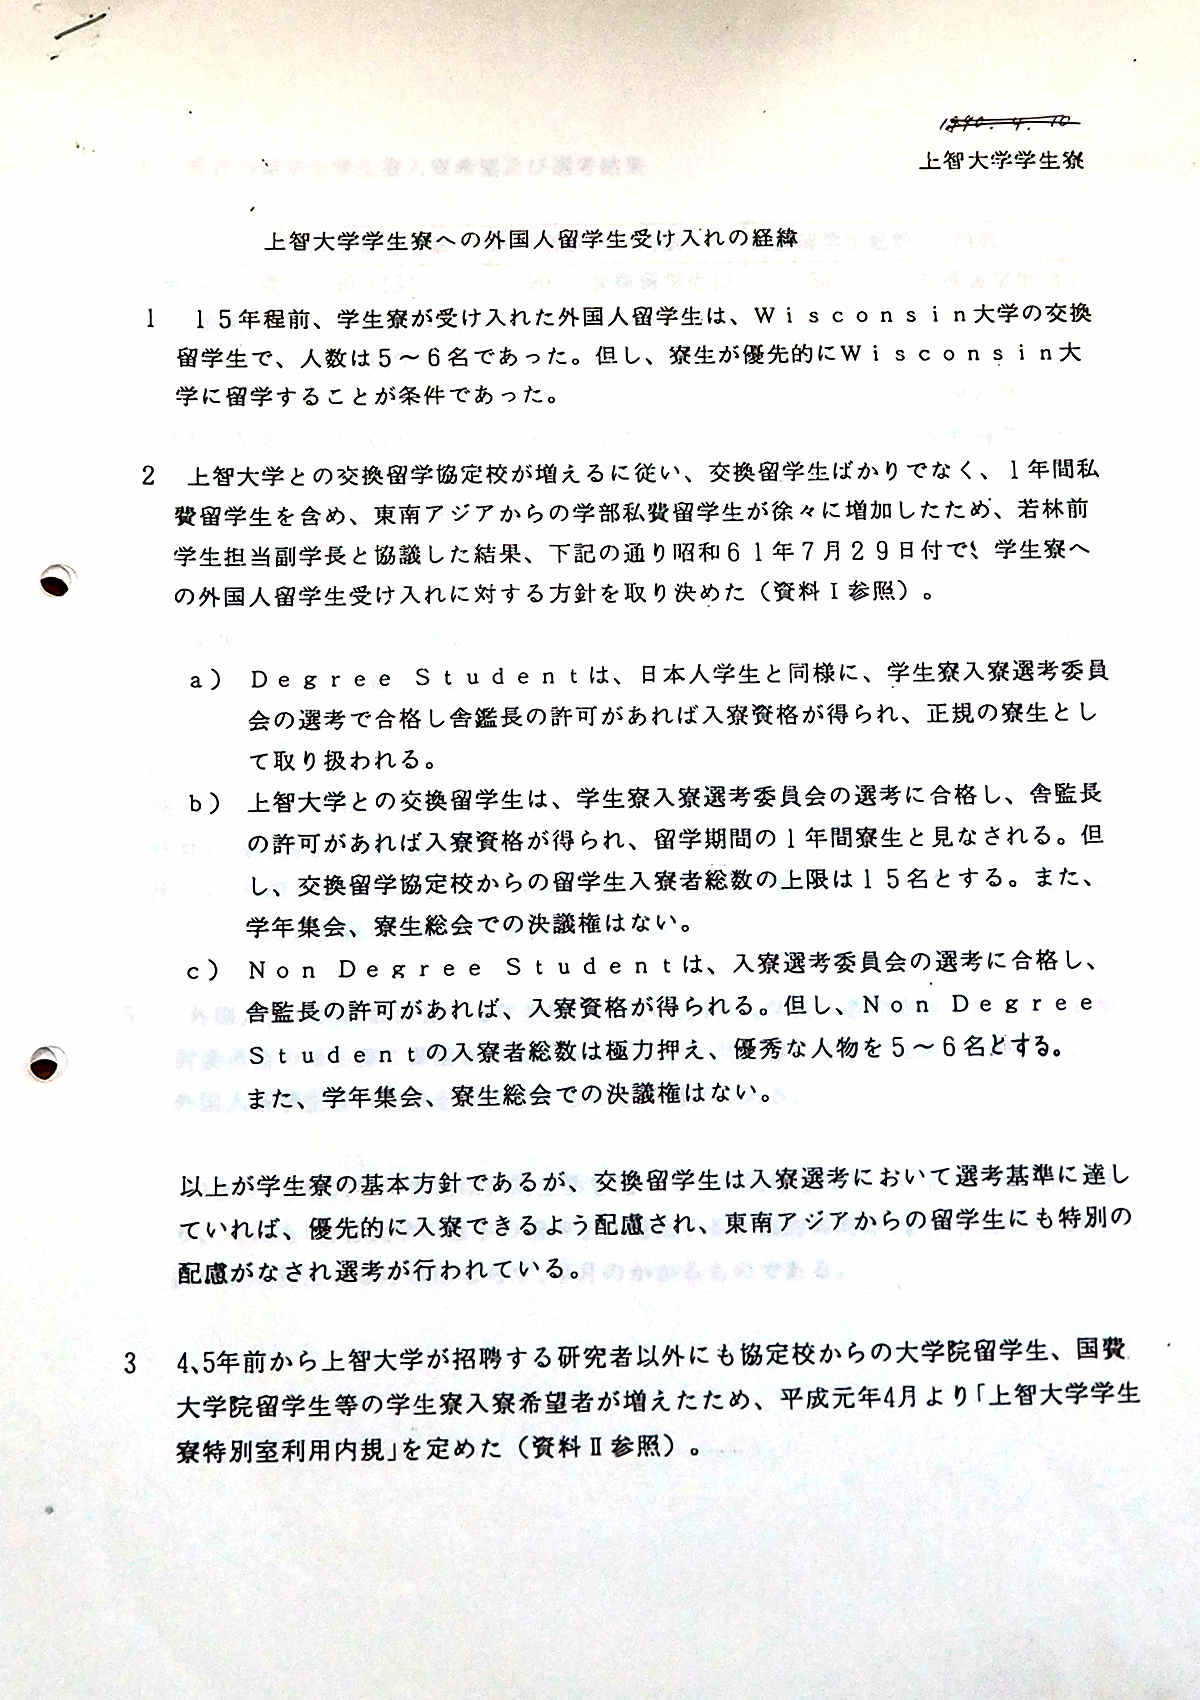 A document explaining the dormitory’s policy on the acceptance of international students (1990)